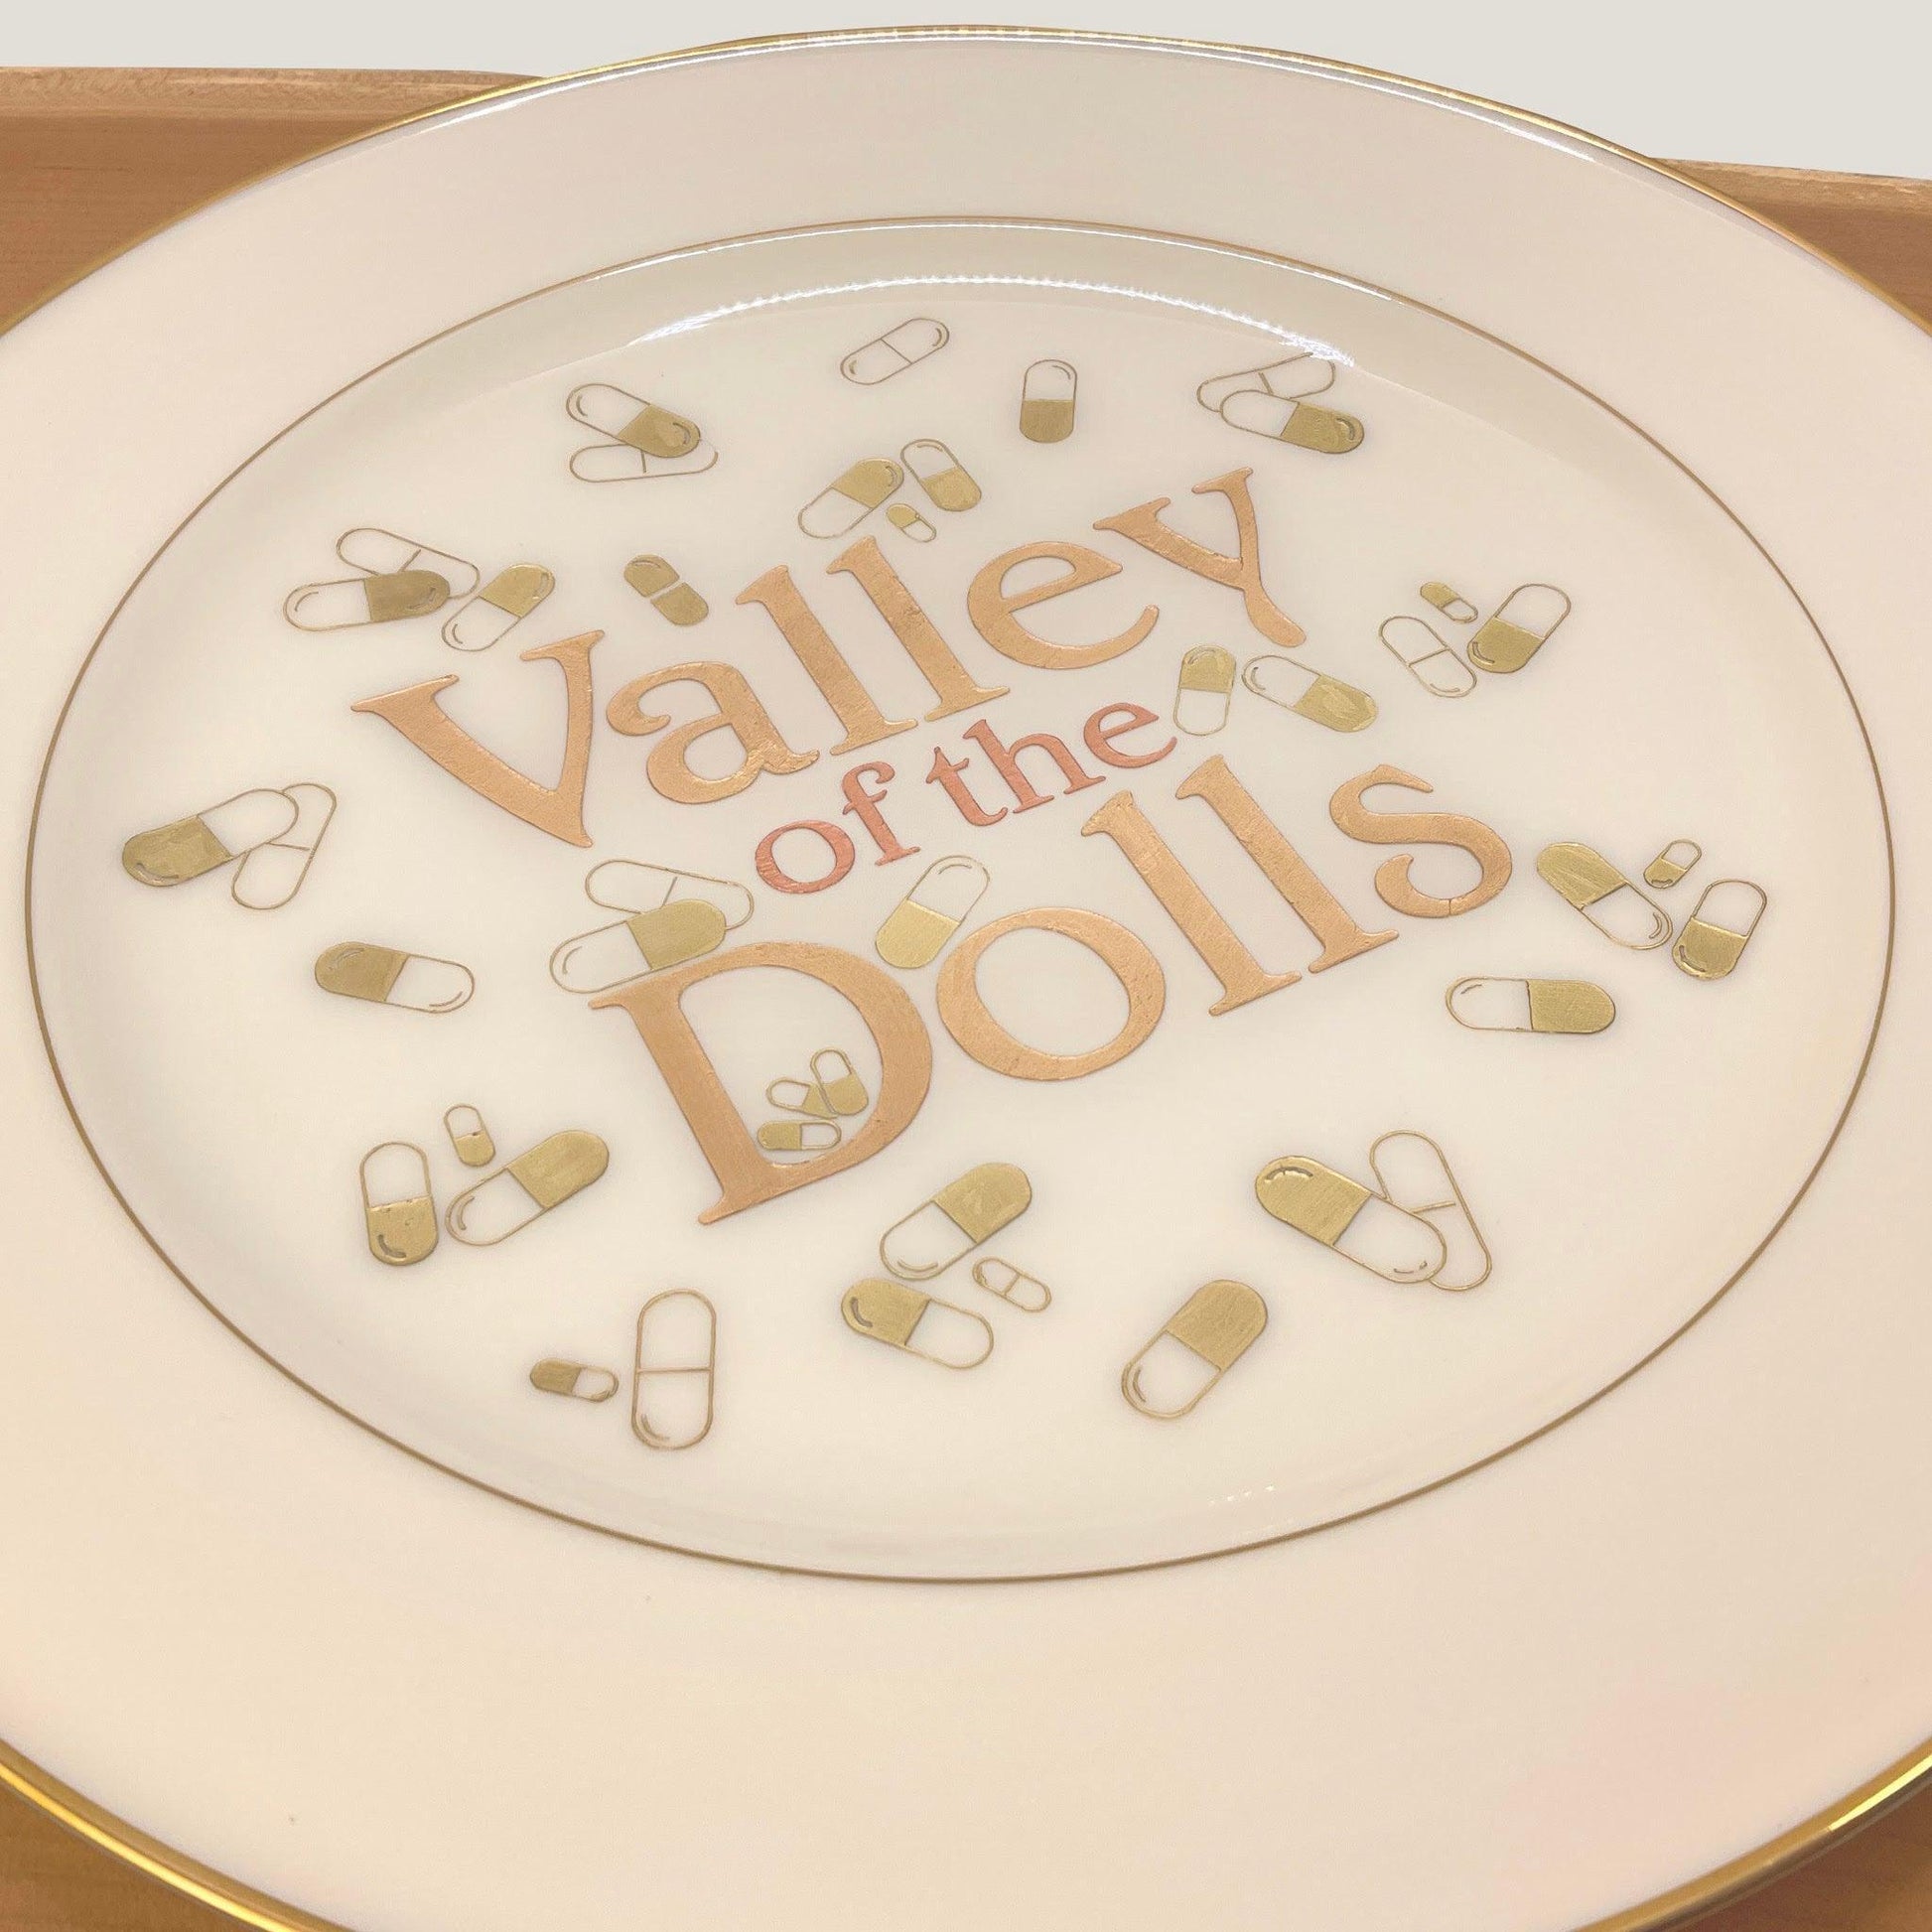 Valley of the Dolls Charger Plate - Offensively Domestic